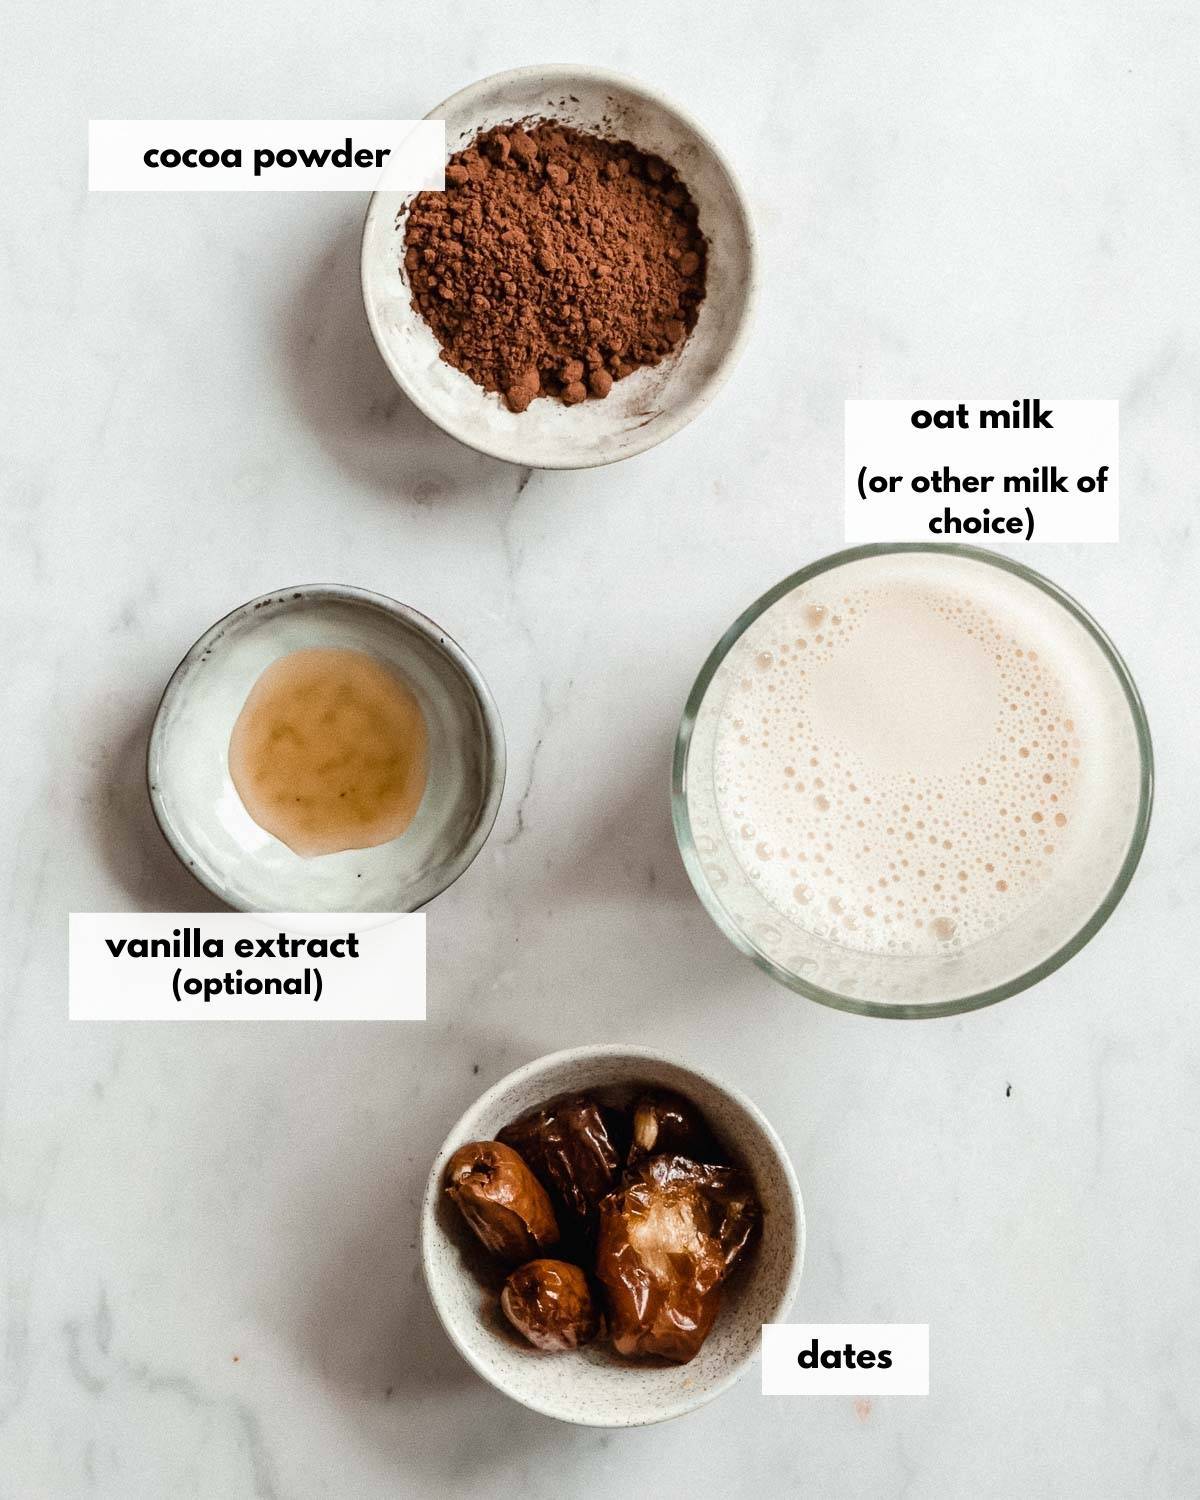 all ingredients needed to make healthy chocolate milk with cocoa powder.